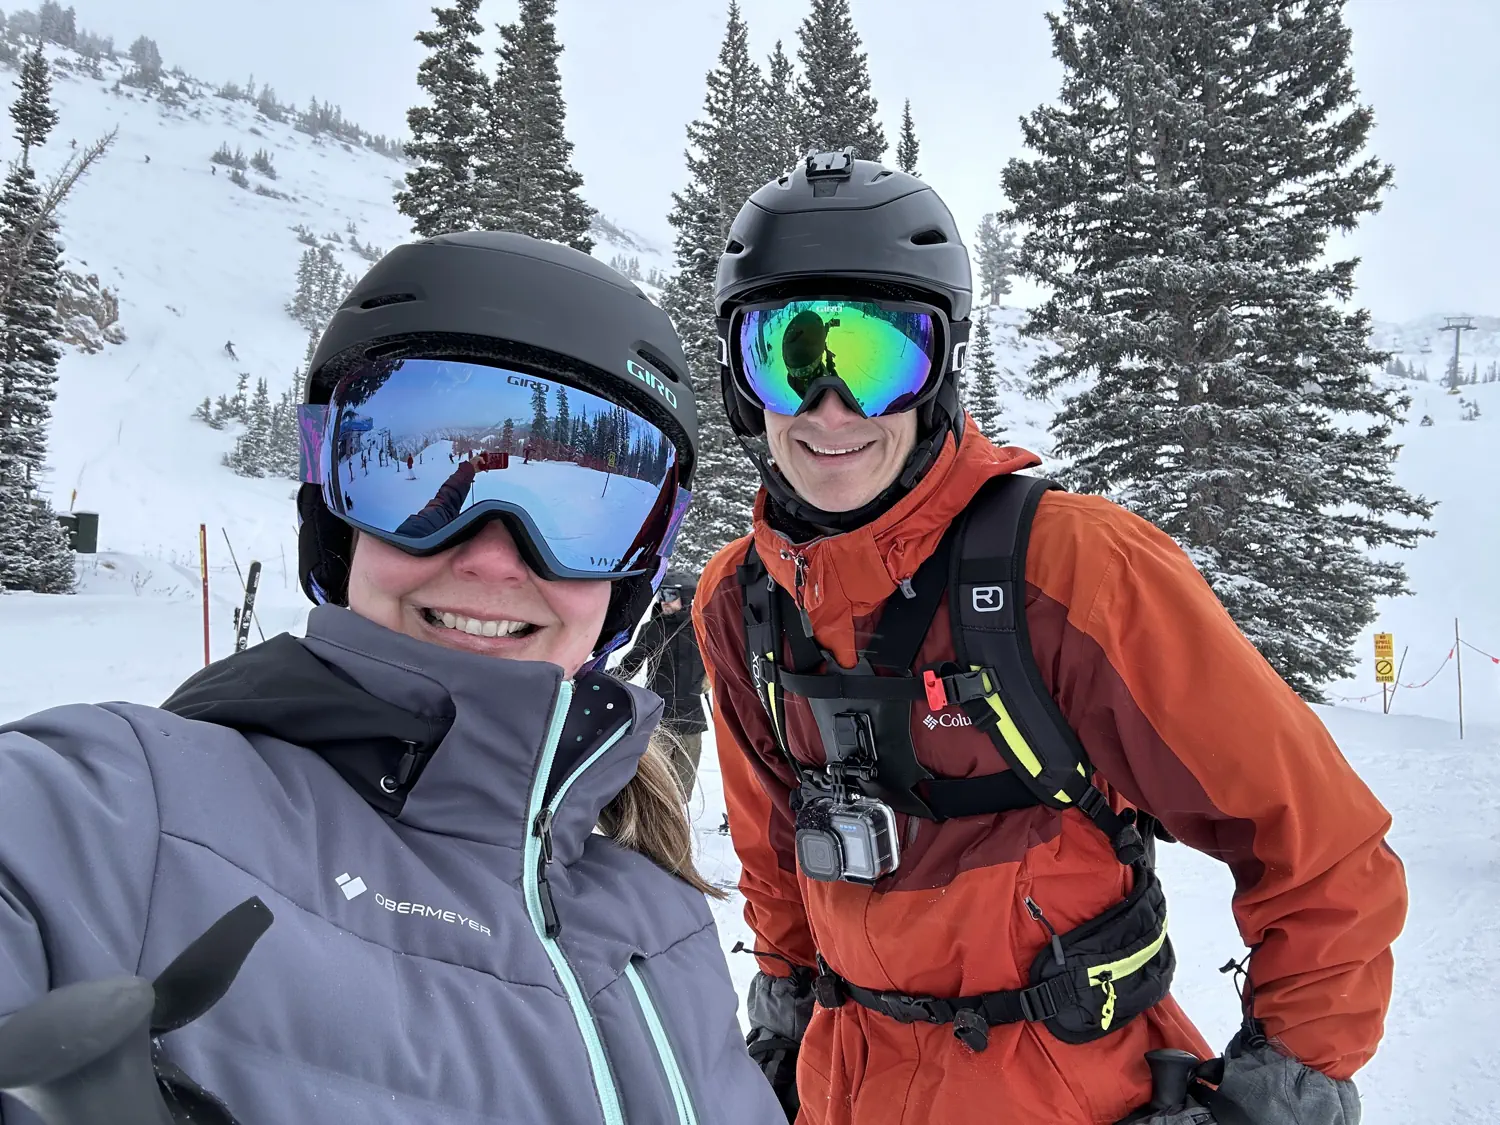 Keith and Lindsey are taking a selfie at the top of the Gadzoom lift at Snowbird